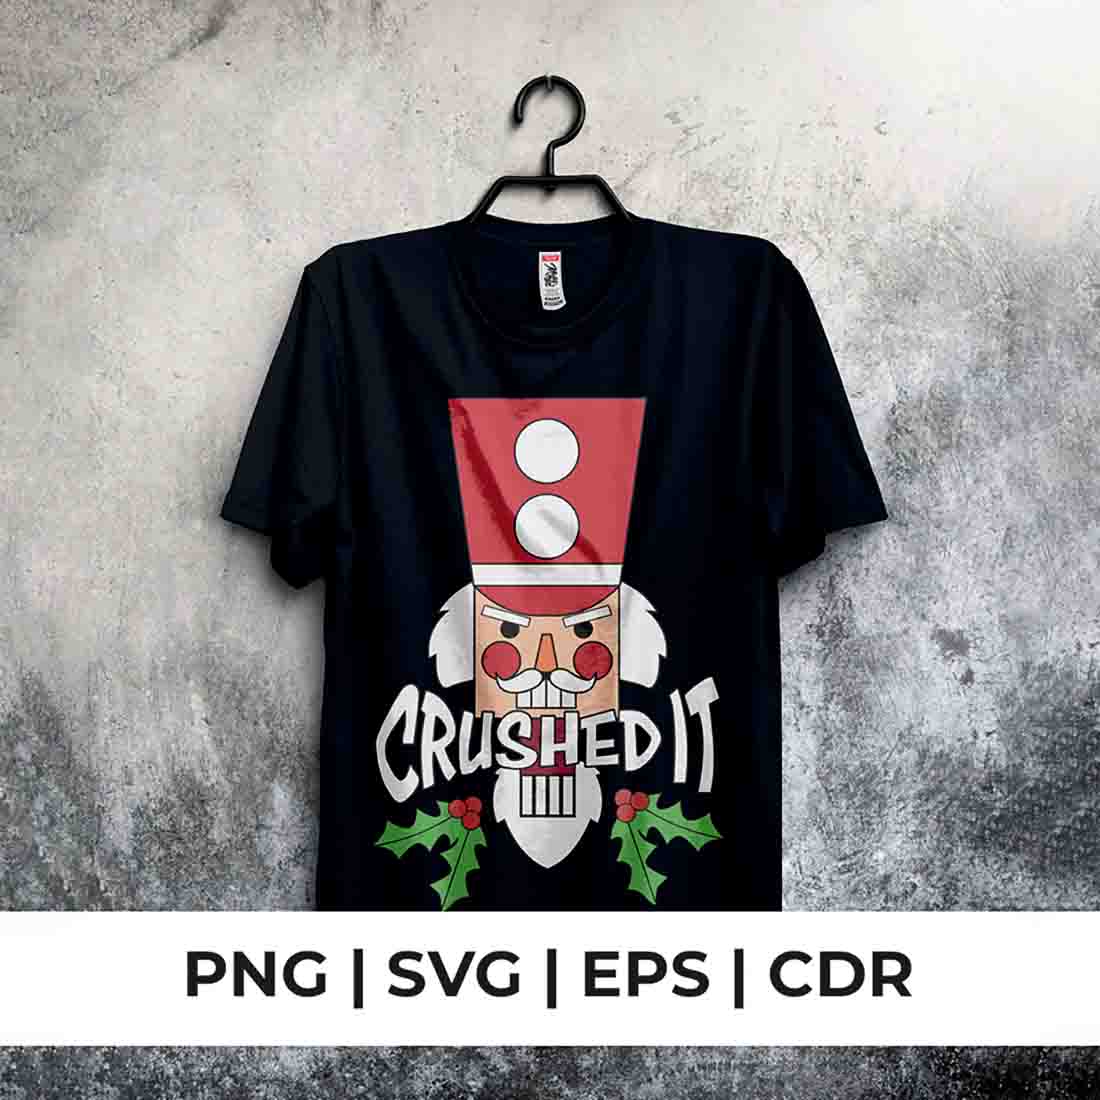 Crushed it! Christmas T-Shirt PNG |SVG |EPS |CDR main cover.